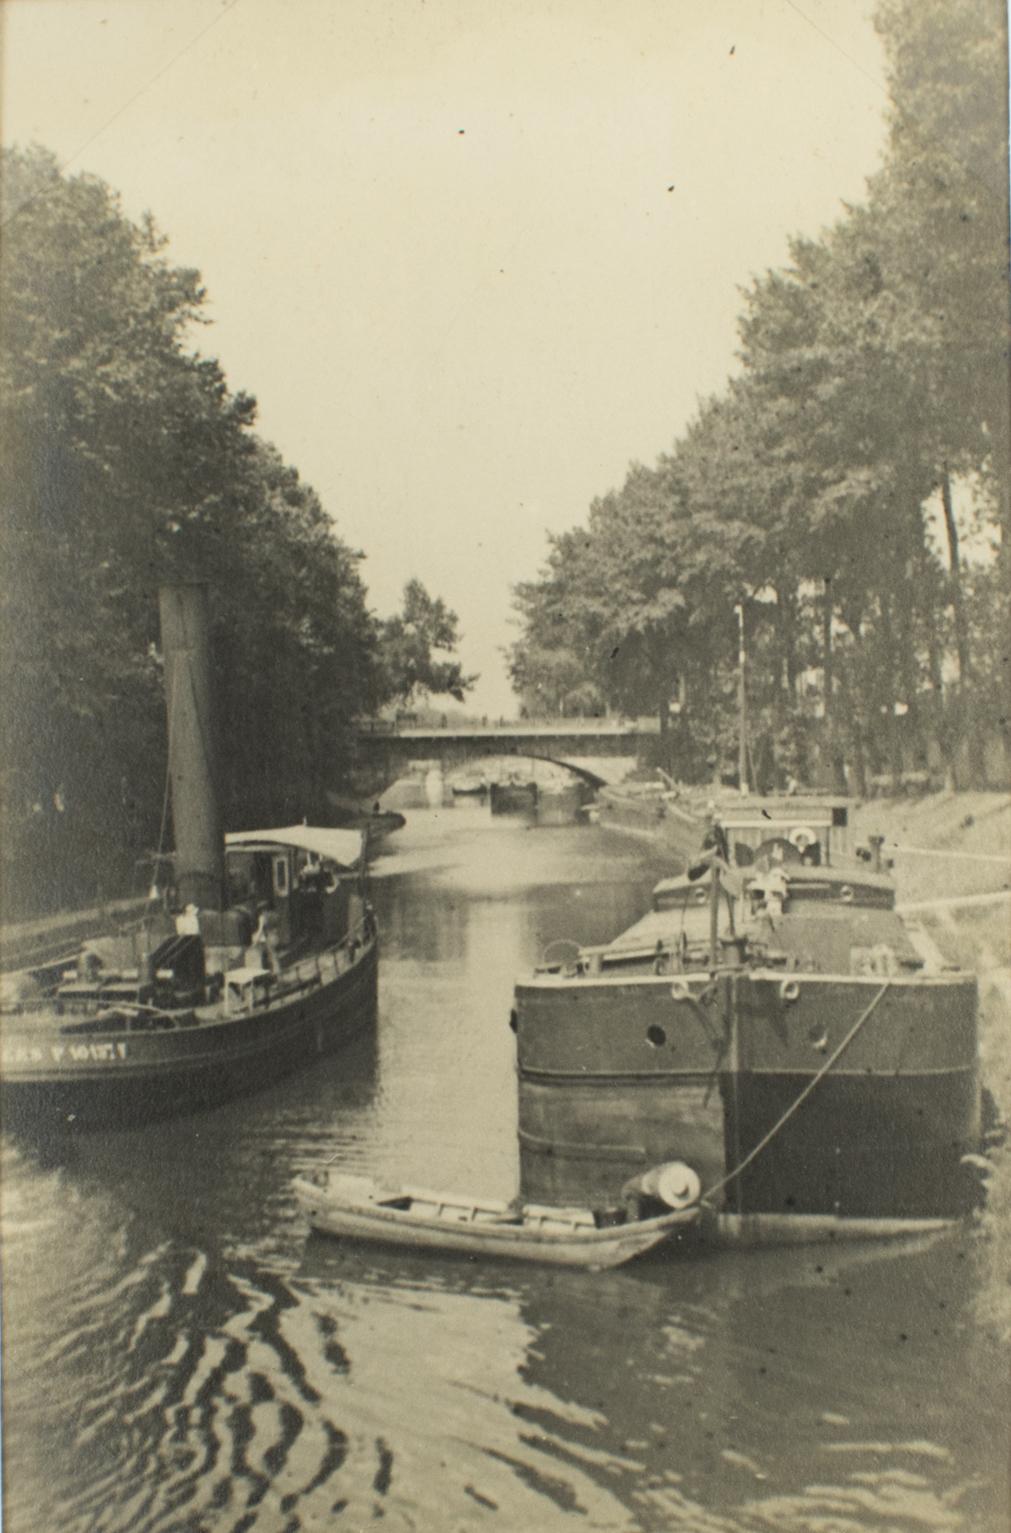 Barge Boats near Paris, France 1926, Silver Gelatin Black and White Photography